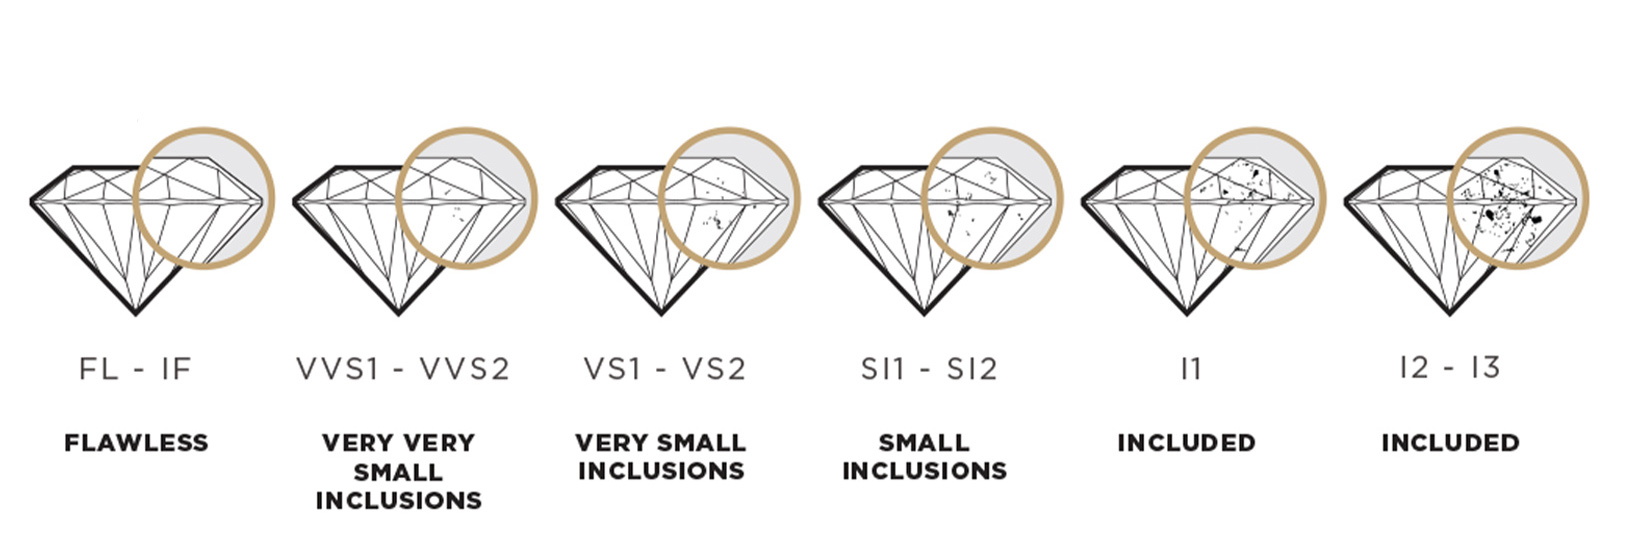 Image of the diamond clarity scale